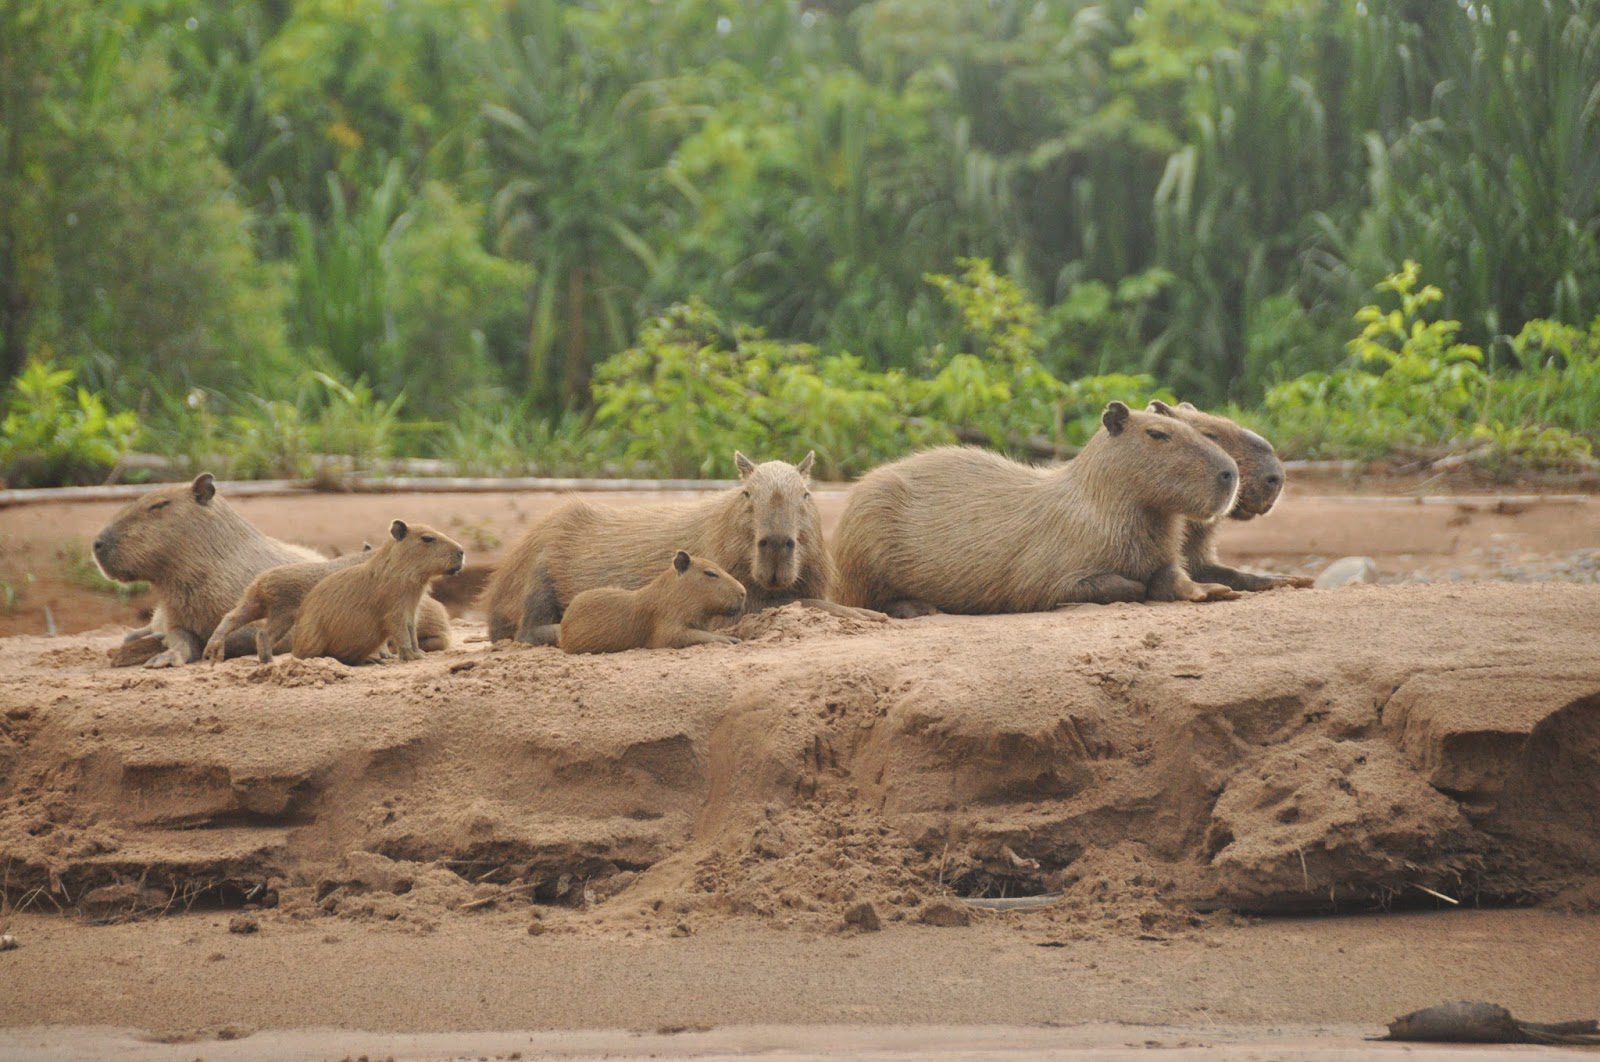 On our way to the remote lake, we saw several families of capybaras - the largest rodent in the world! Looks kind of like a giant guinea pig, doesn't it?